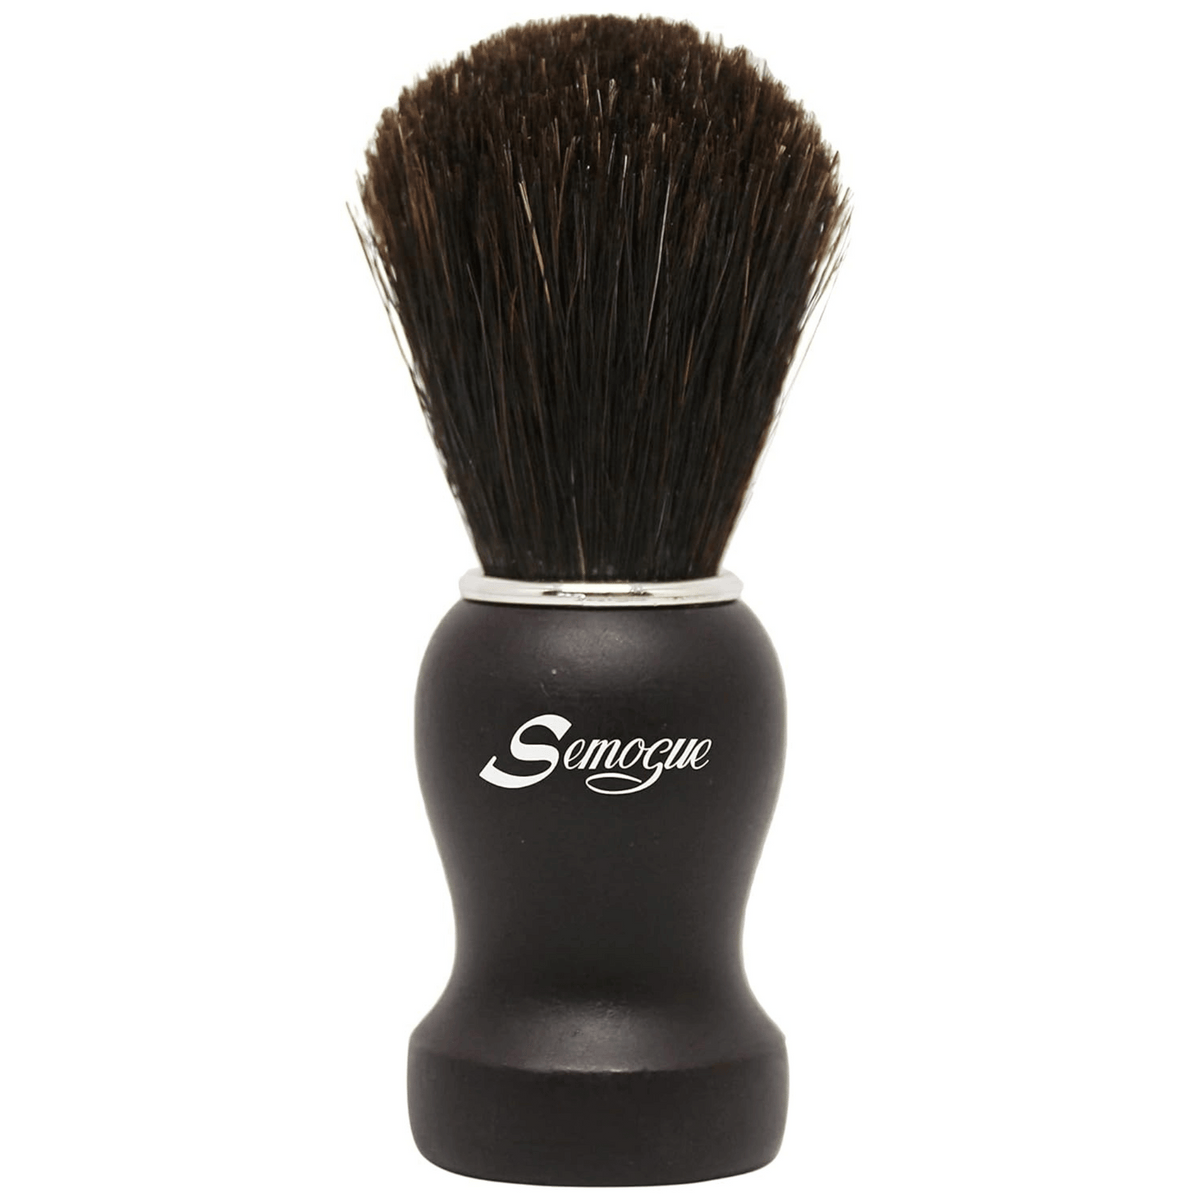 Primary Image of Pure Black Horse Hair Shave Brush